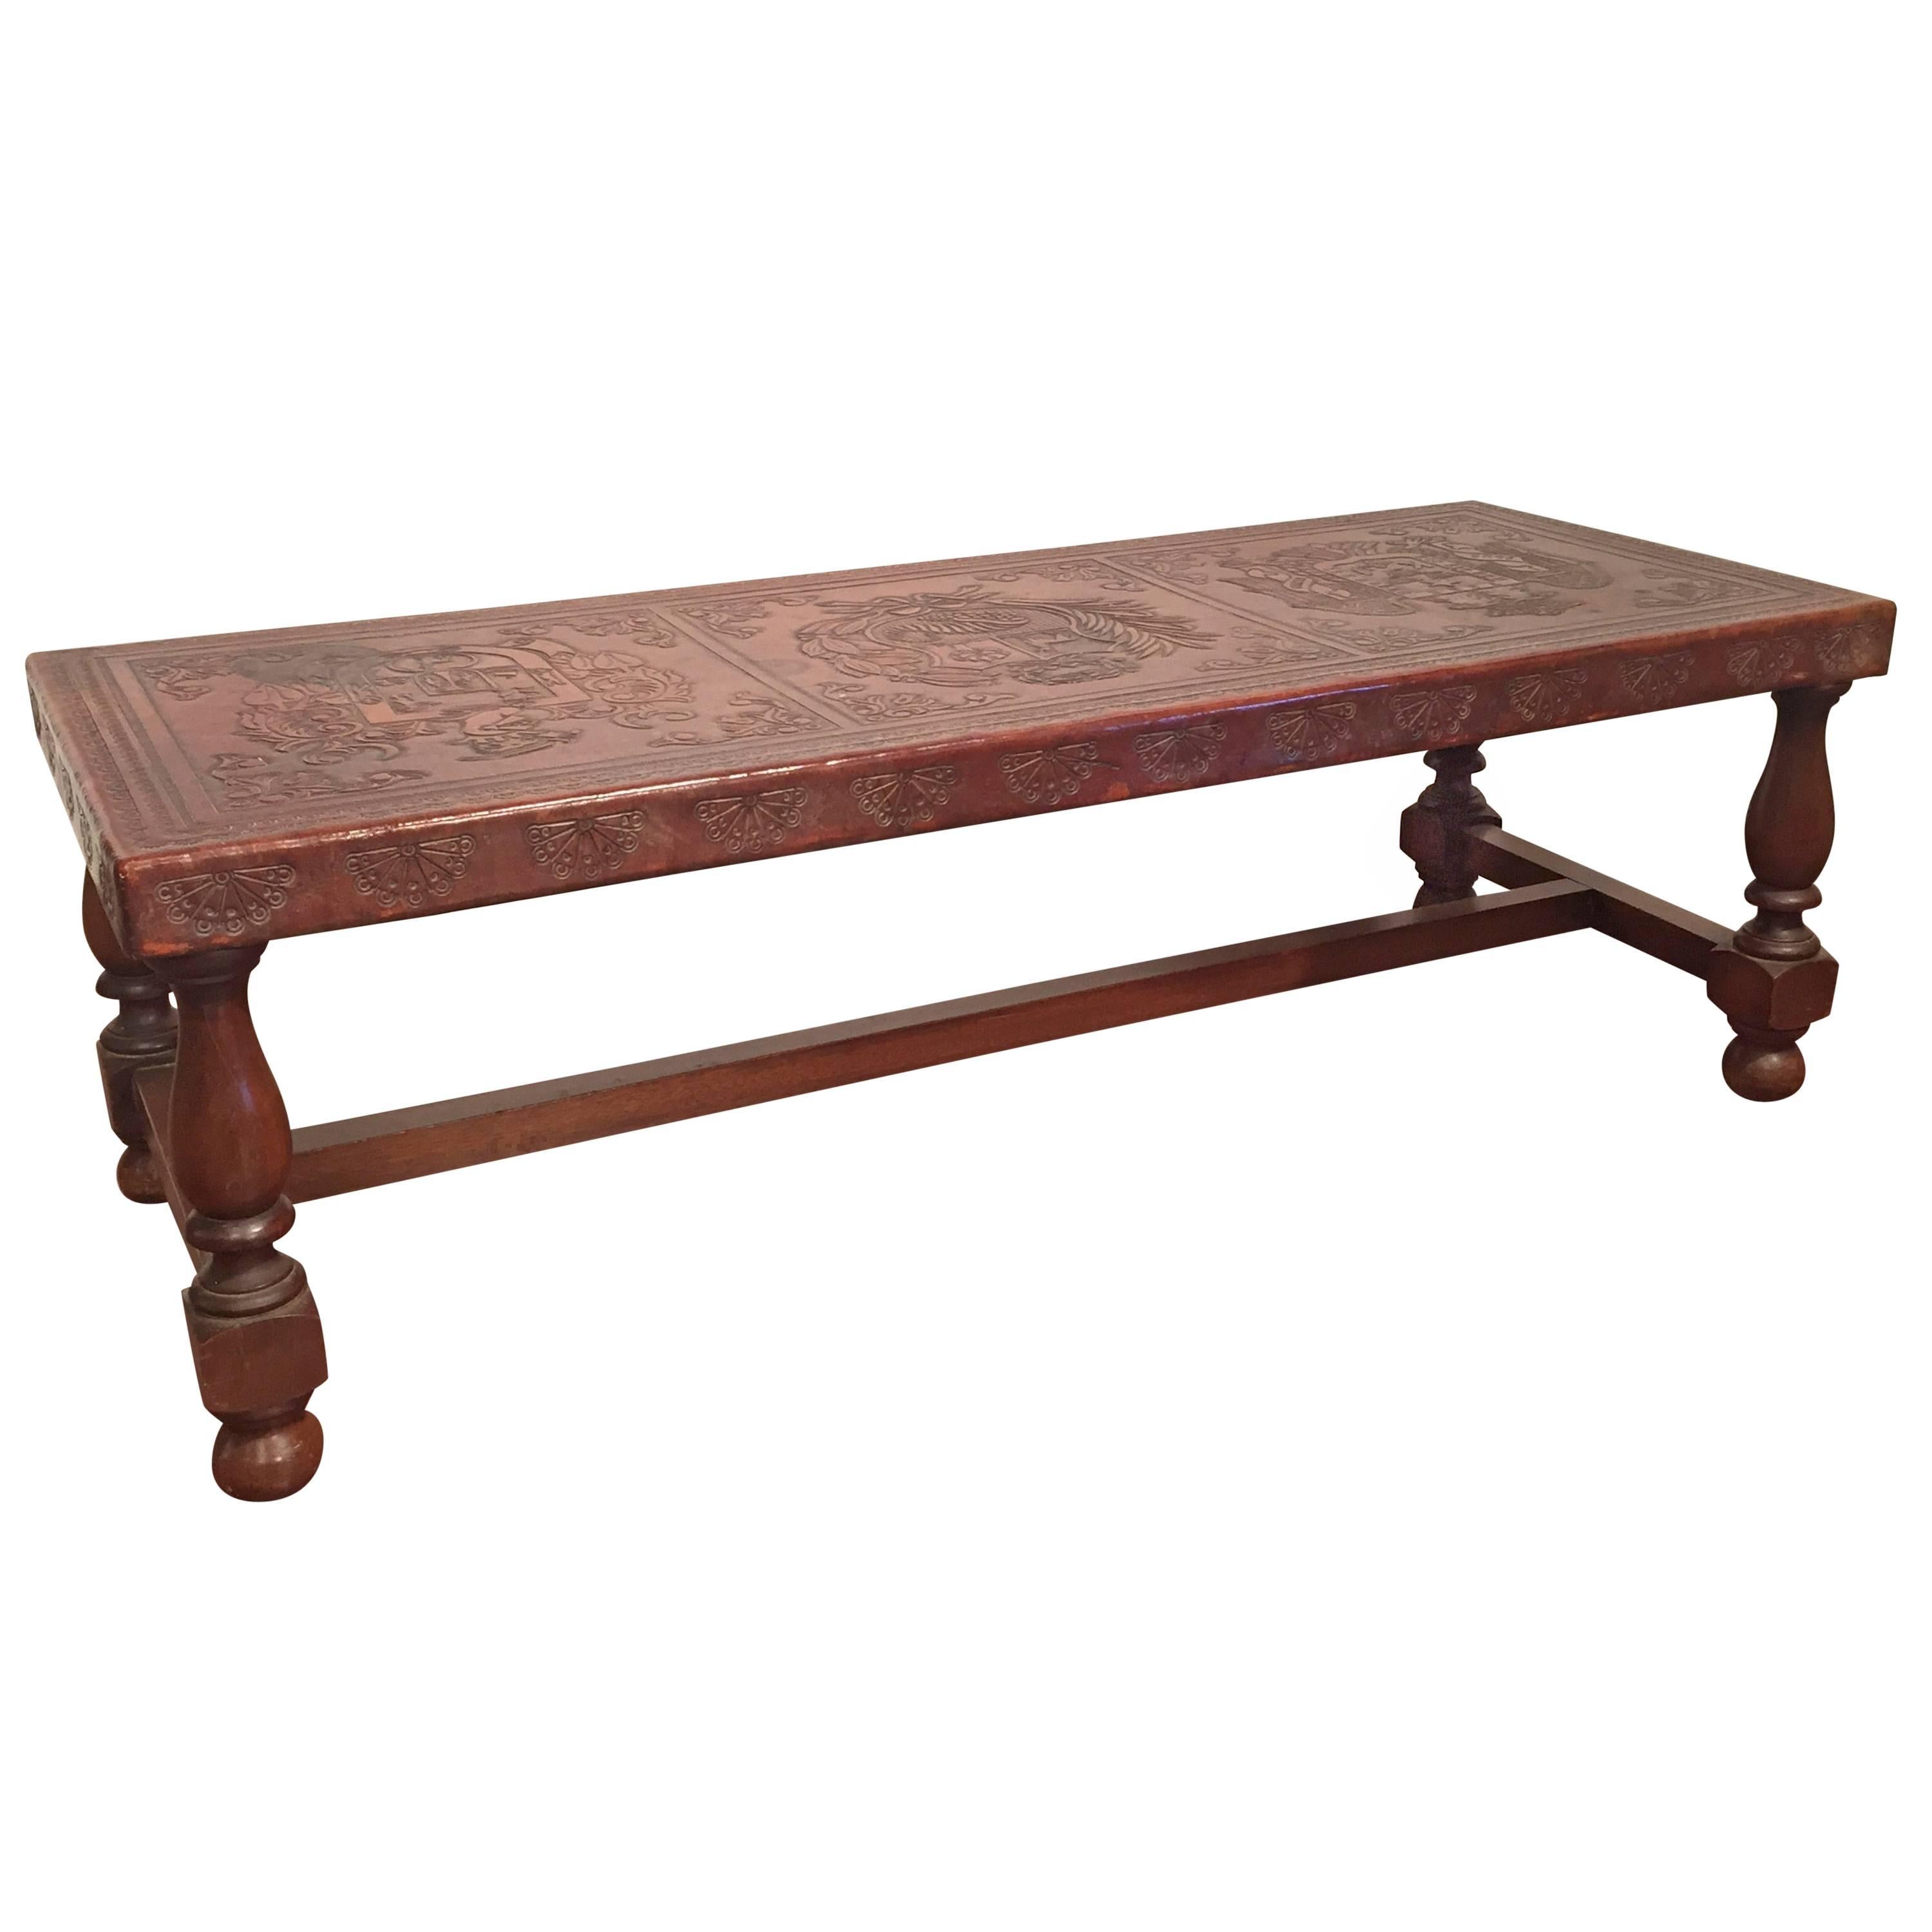 Antique French Bench with Tool Leather Top with Three Embossed Crests